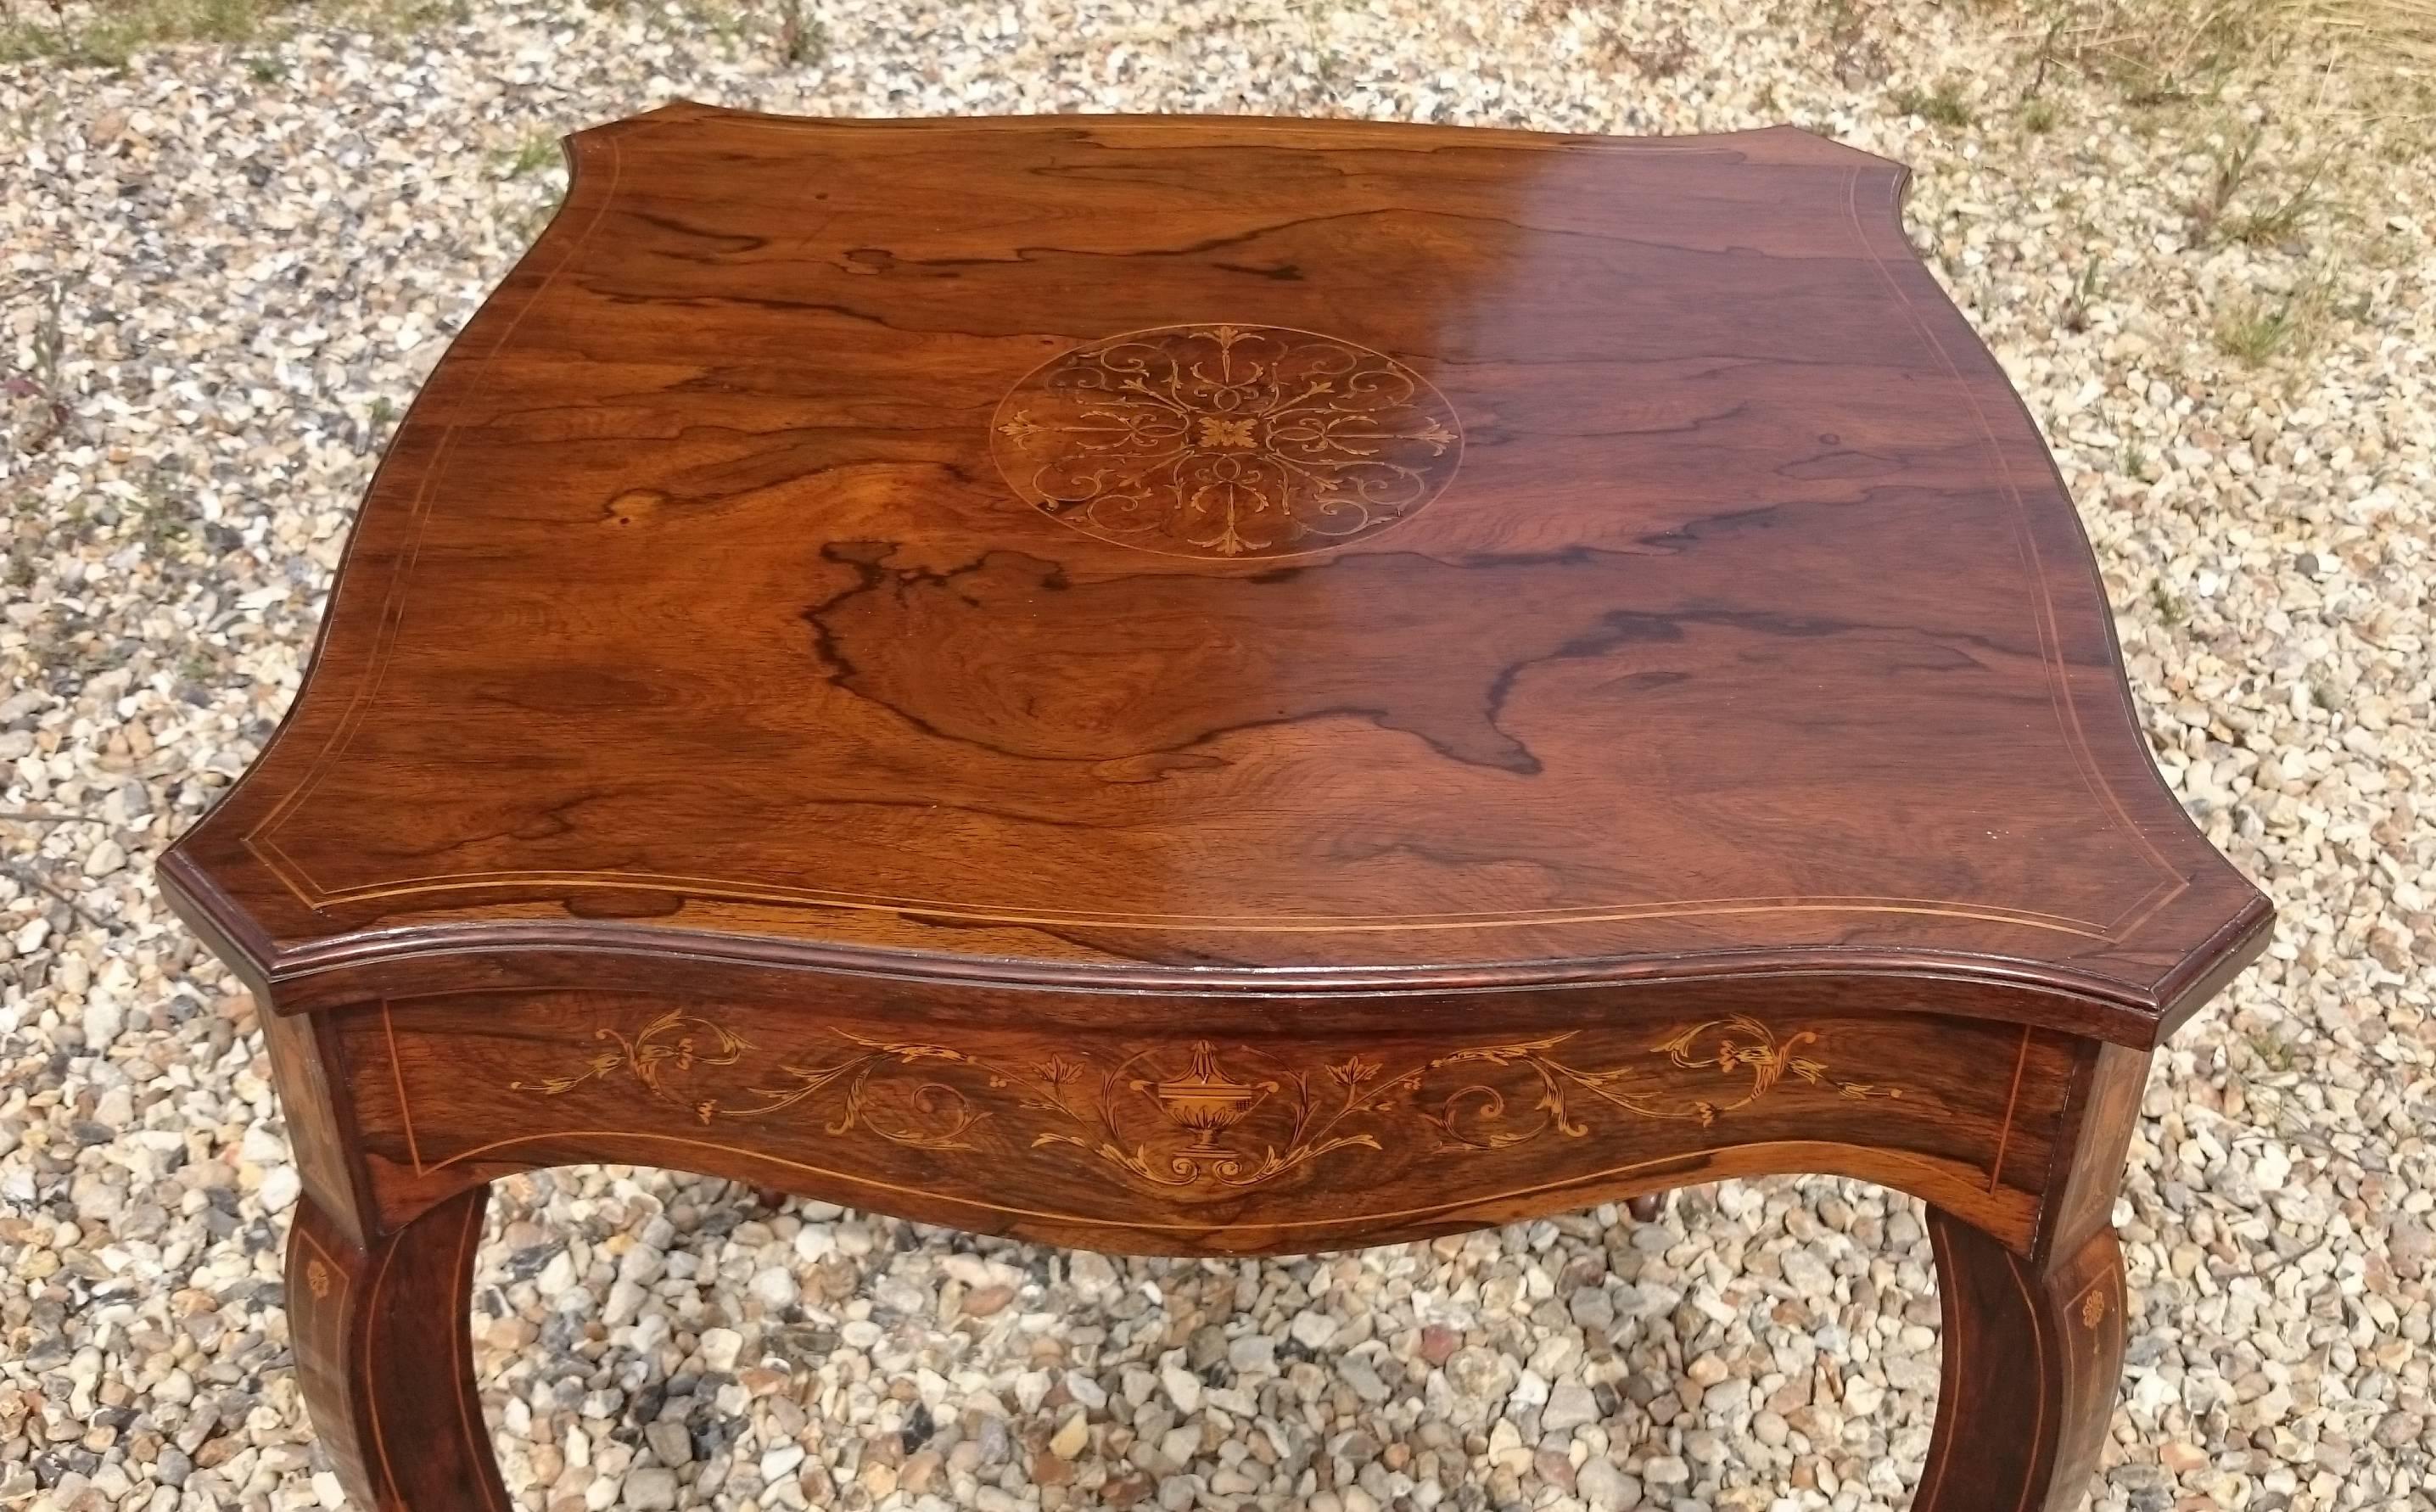 Very fine quality early 20th century antique centre table made of exceptional quality timber and with very intricate inlay. This table was a wedding present for the original owner and has been in the same family ever since. At a time when a lot of